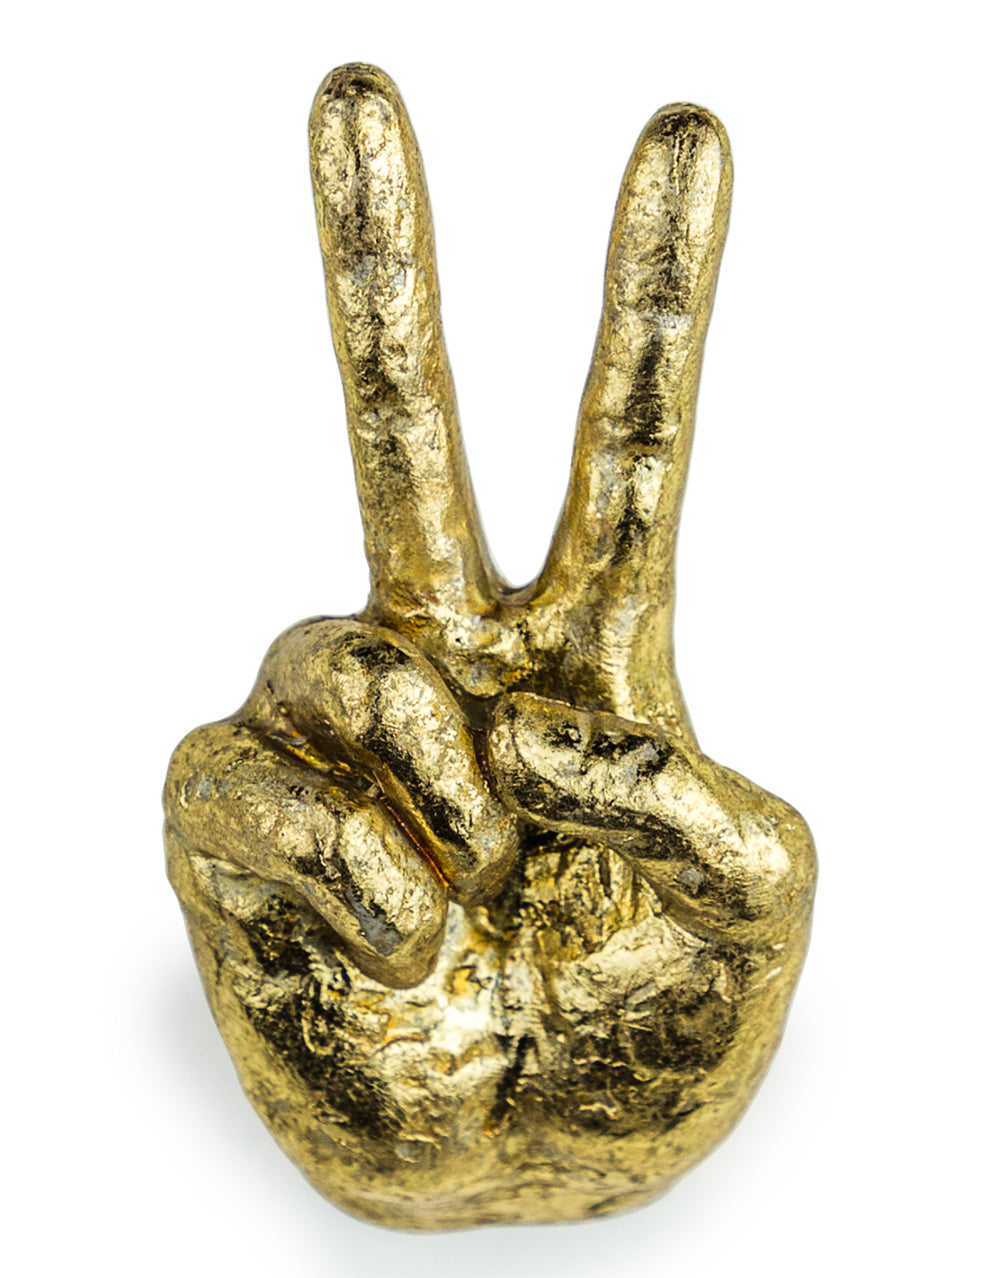 Hand Wall Hook - In 'Peace' and 'Rock On' Styles